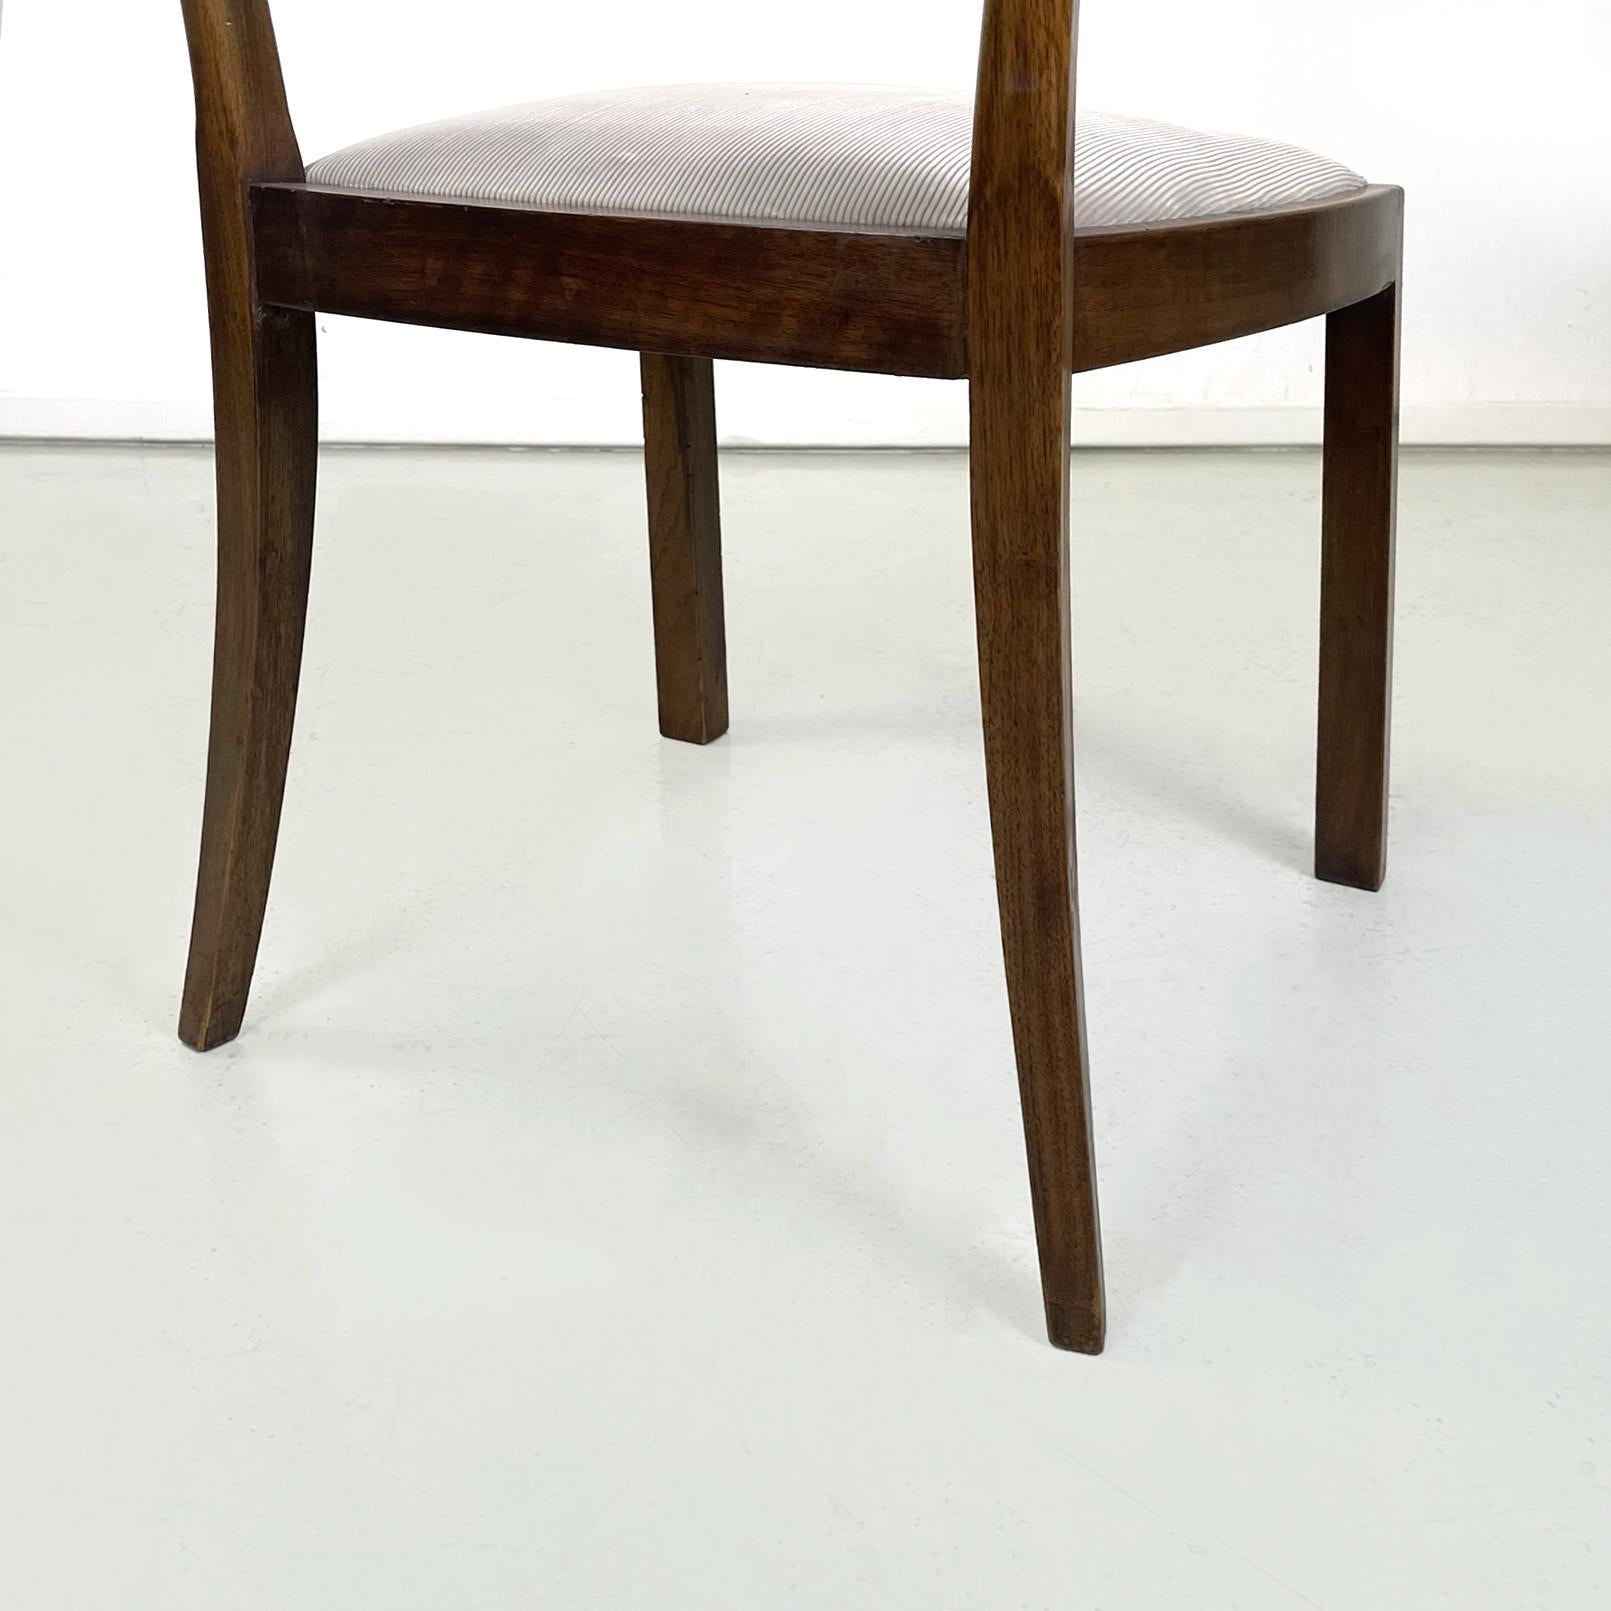 Hungary Art Deco Chairs in wood and beige corduroy velvet, 1930s For Sale 7